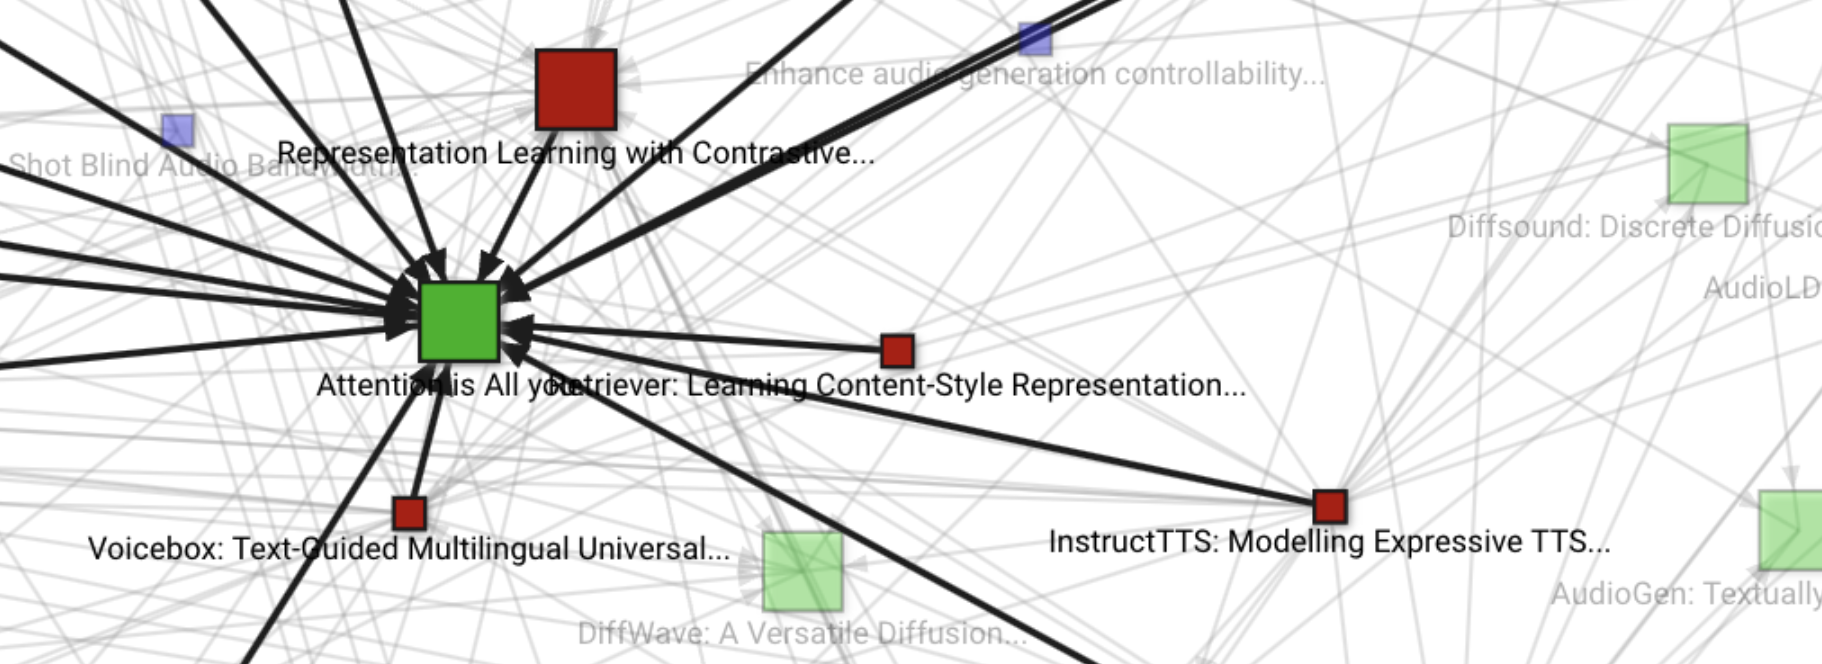 visualization of the citation network